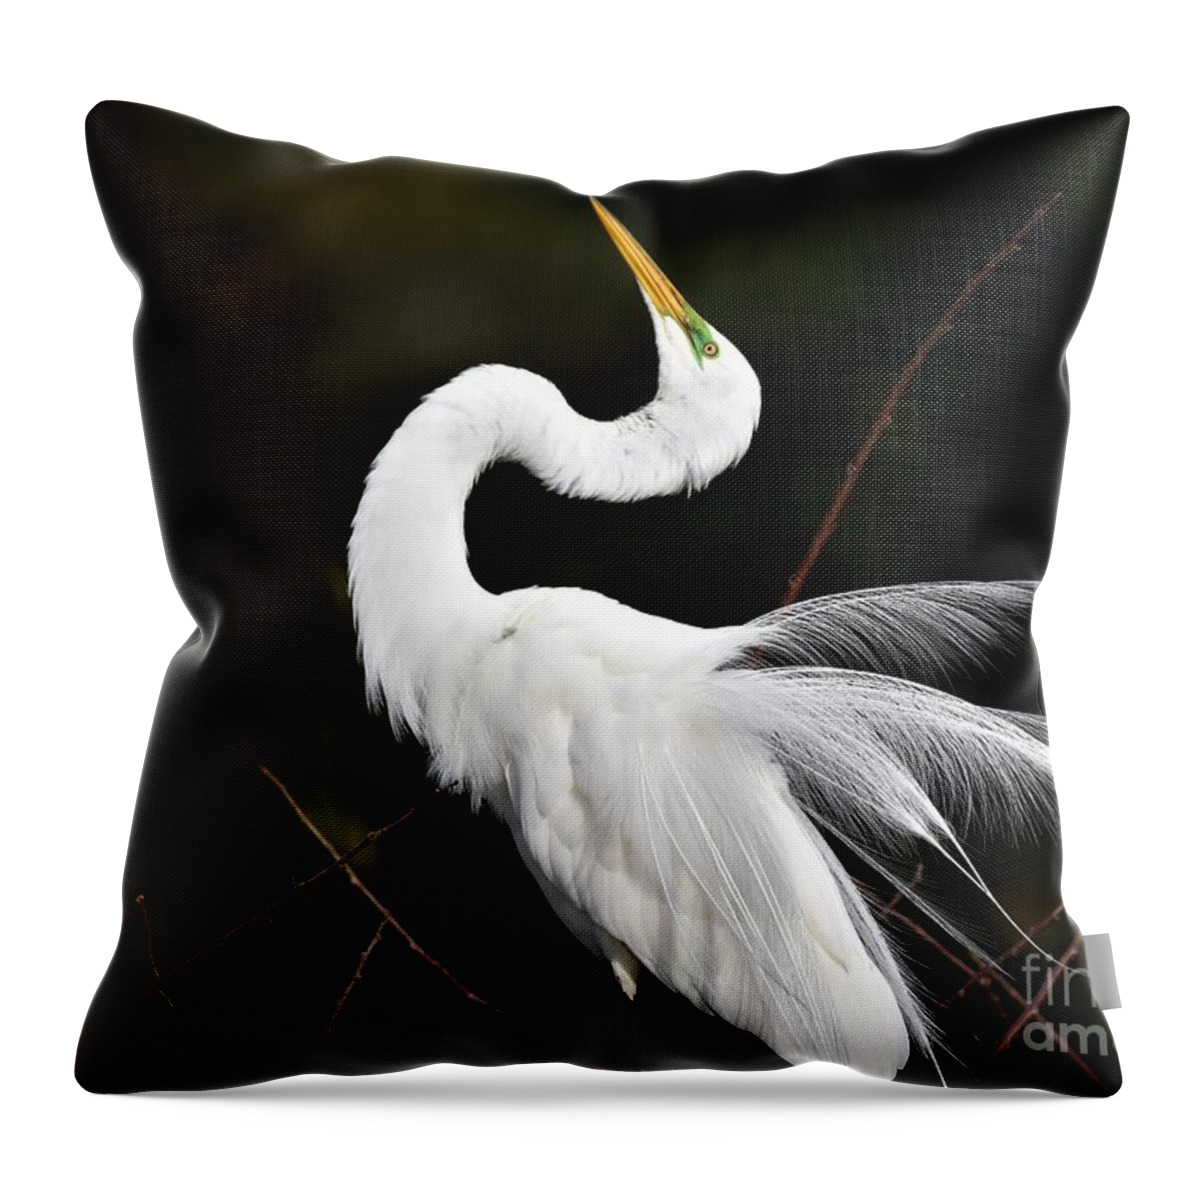 Great White Egret Throw Pillow featuring the photograph Feathers On Display by Julie Adair